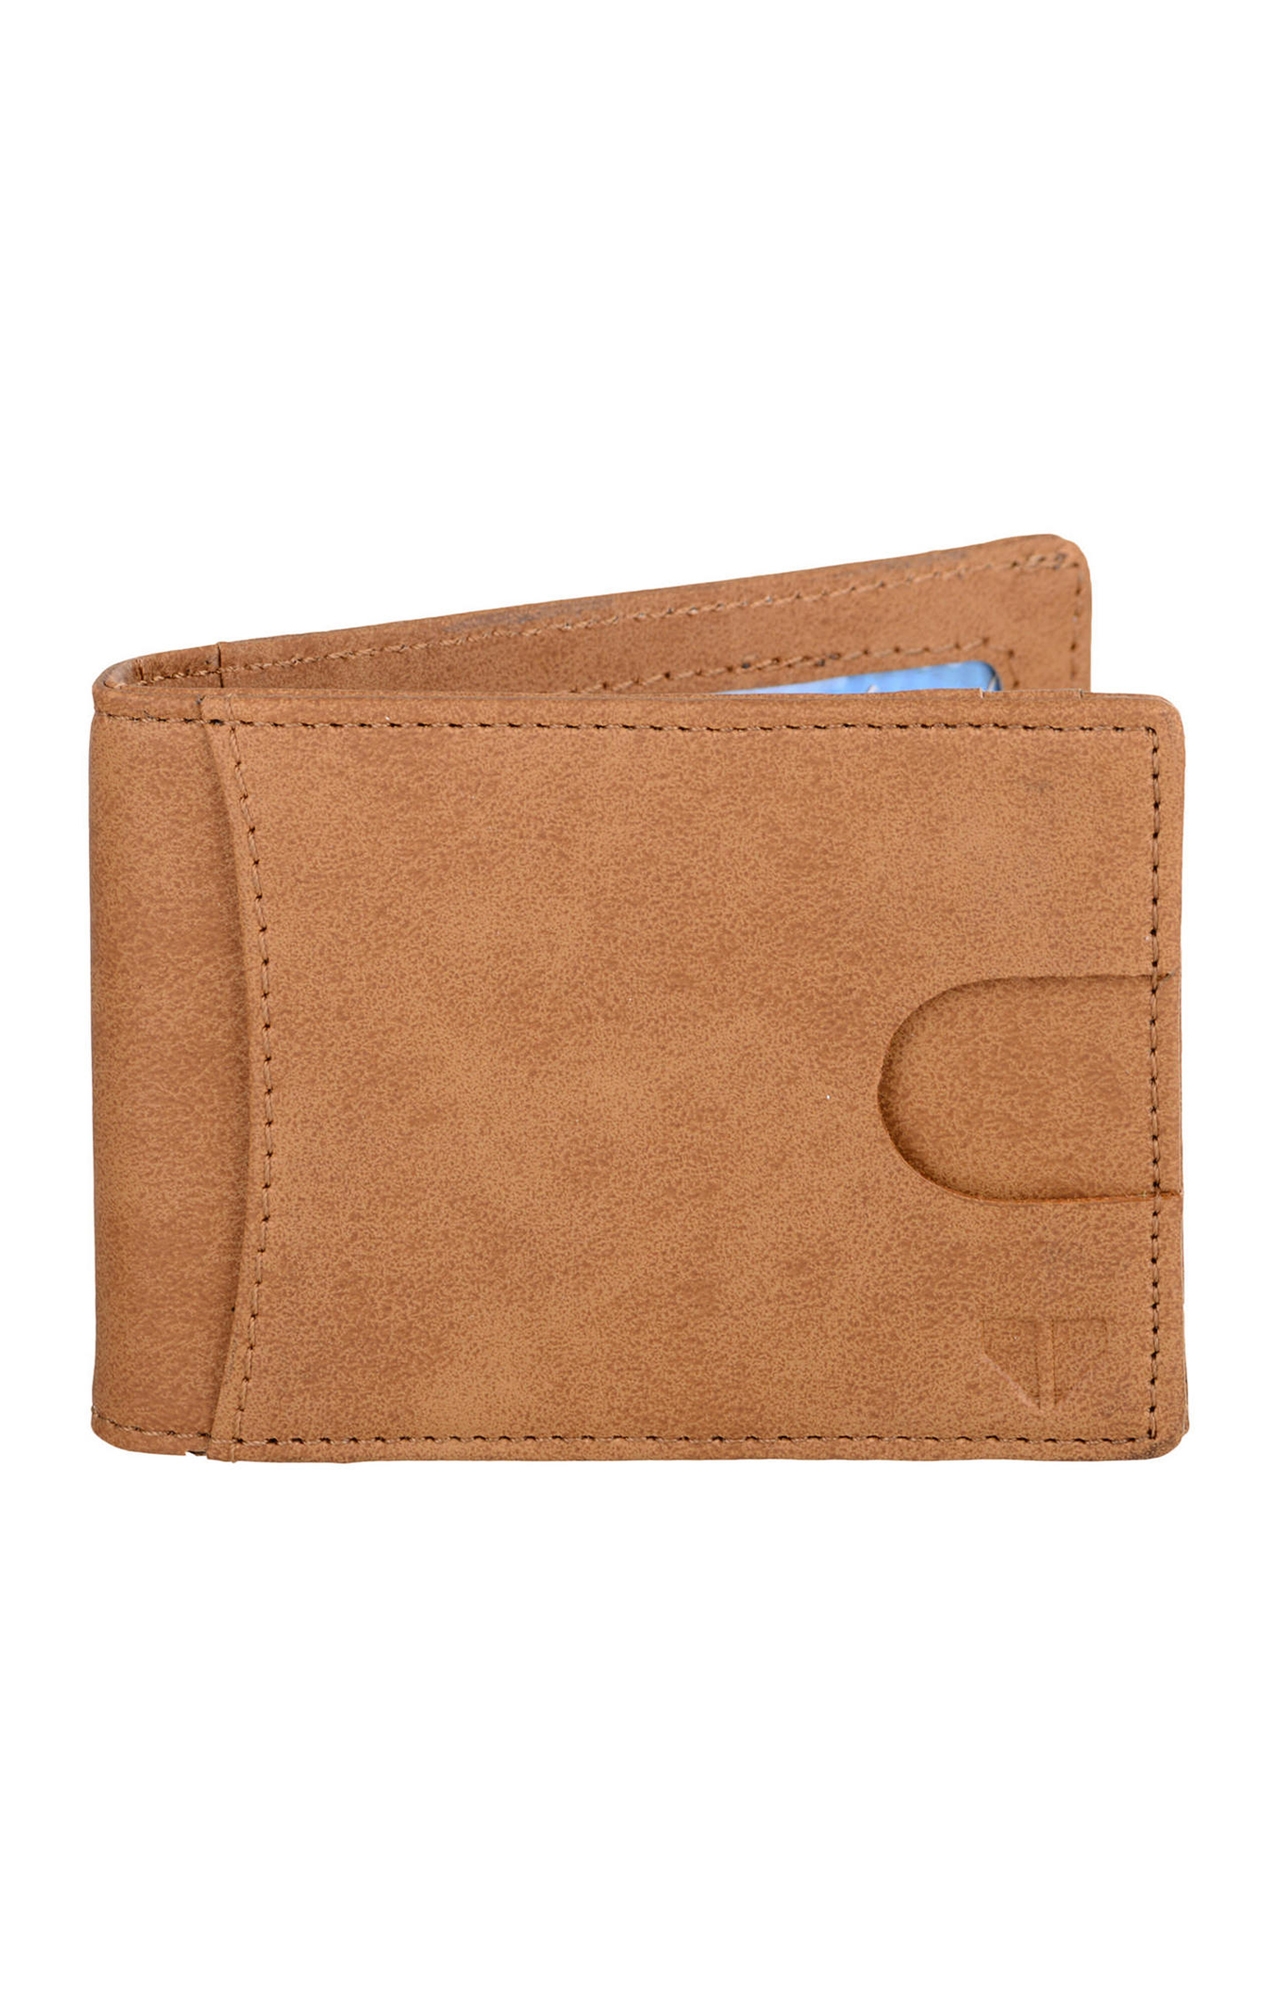 Beige Card Cases